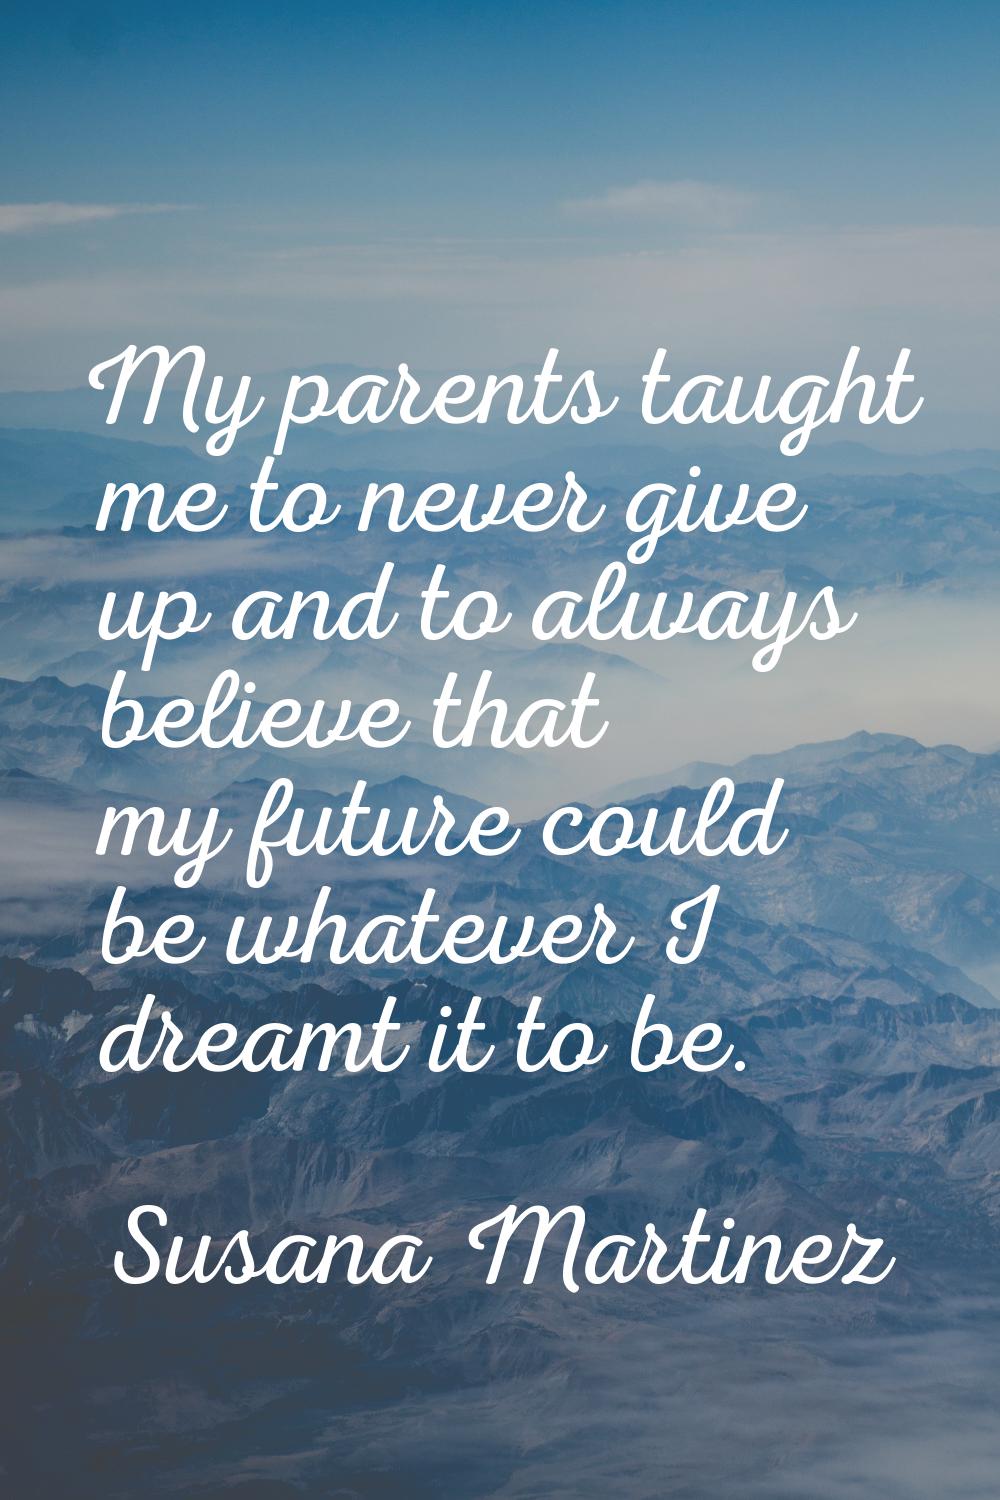 My parents taught me to never give up and to always believe that my future could be whatever I drea